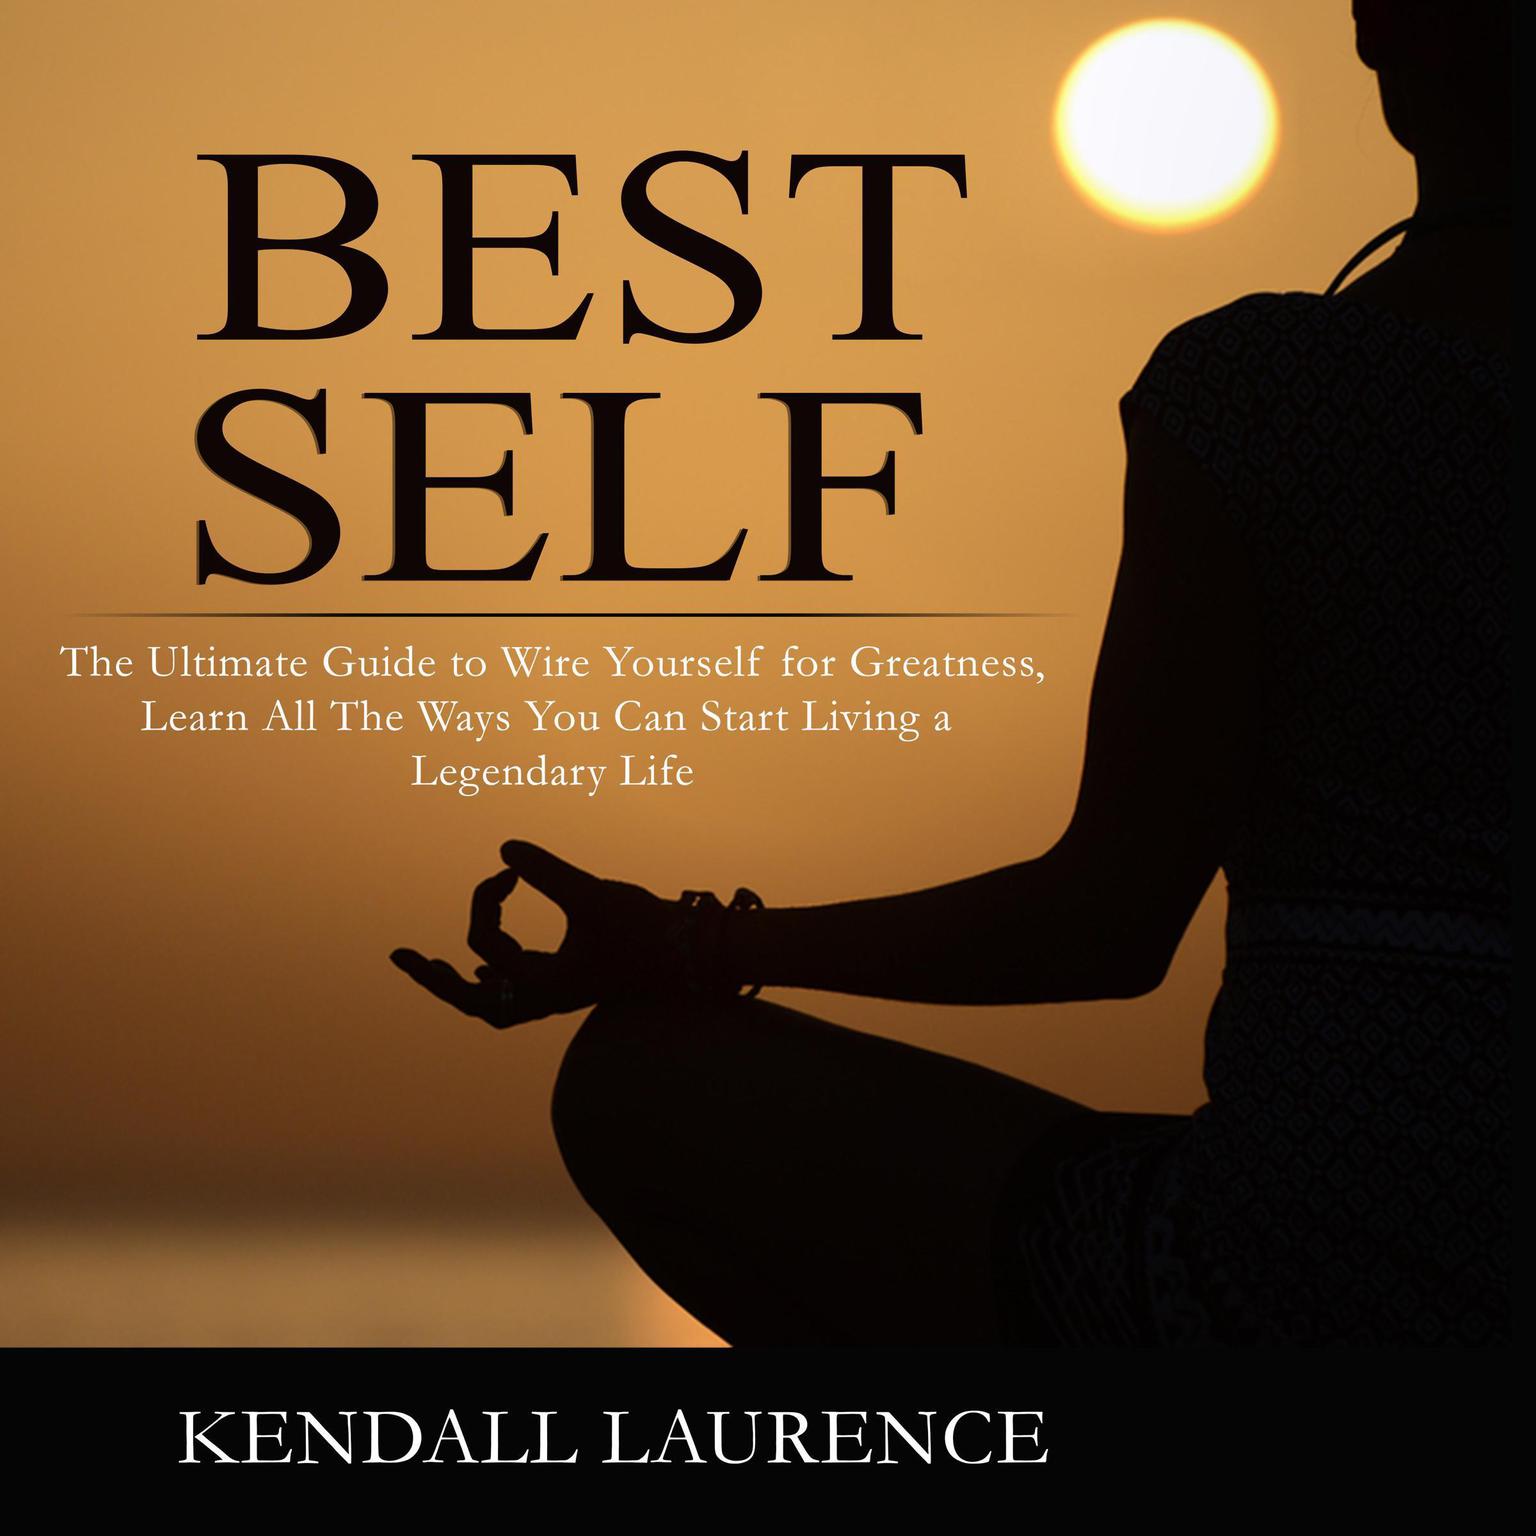 Best Self: The Ultimate Guide to Wire Yourself for Greatness, Learn All The Ways You Can Start Living a Legendary Life Audiobook, by Kendall Laurence